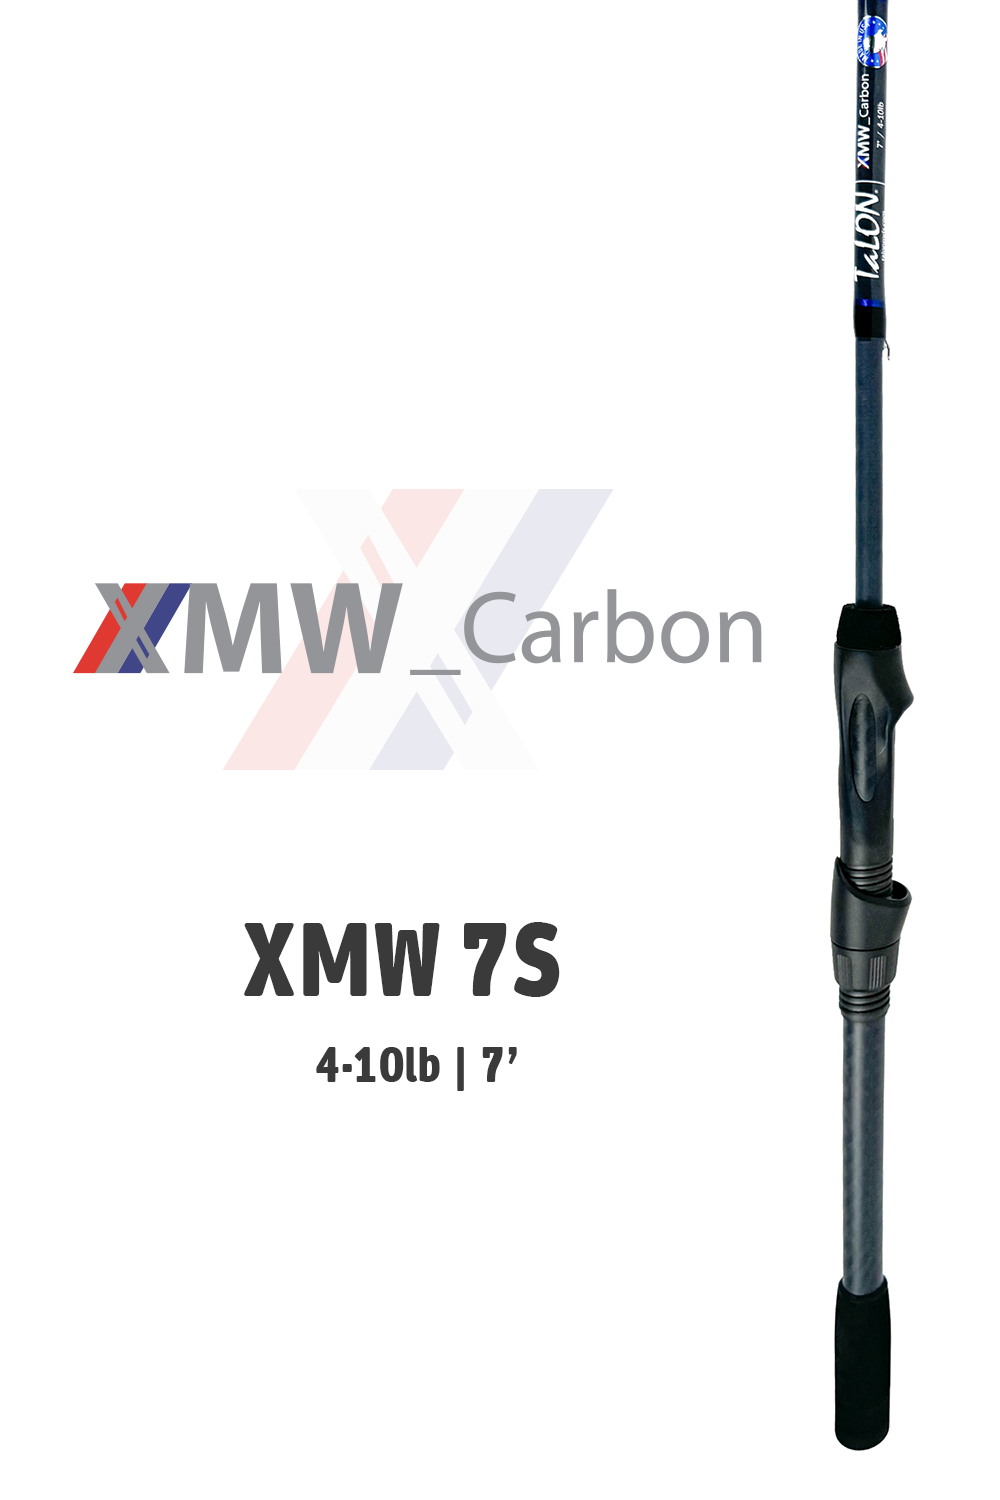 XMW_Carbon - Spinning | 4-10lbs - 7'